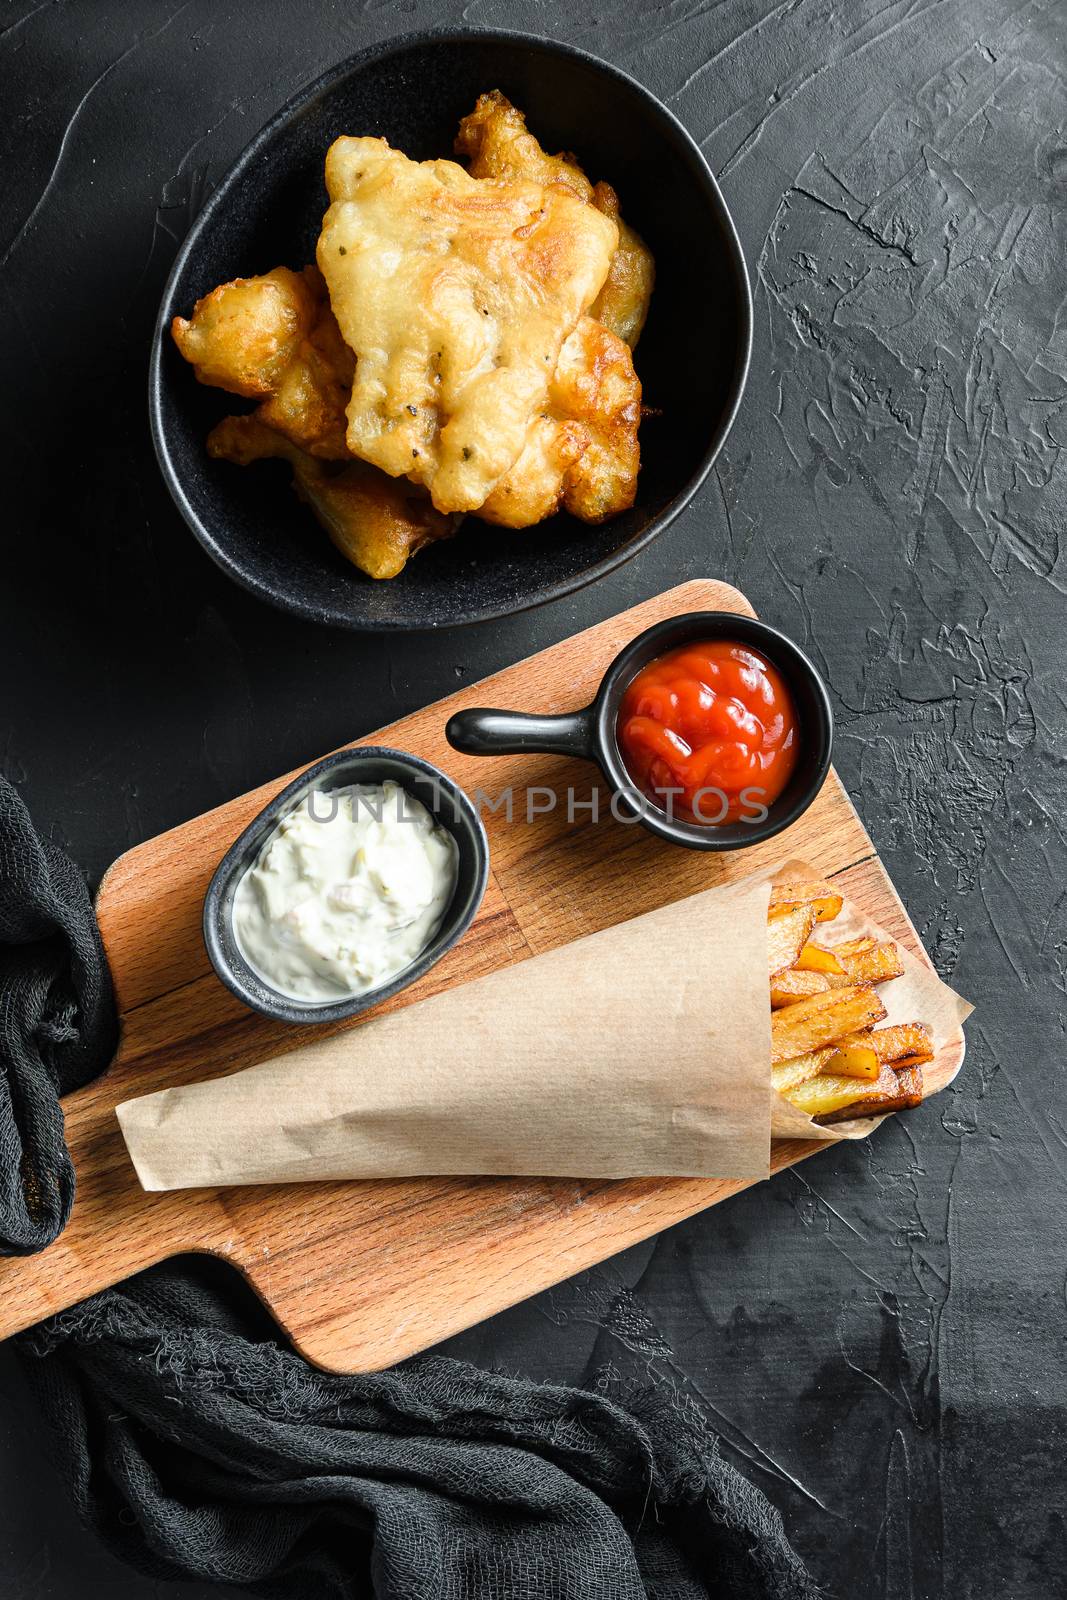 Fish and chips in a paper cone dip and lemon - fried cod, french fries, lemon slices, tartar sauce, ketchup tomatoe and mushy peas over black background top view vertical by Ilianesolenyi